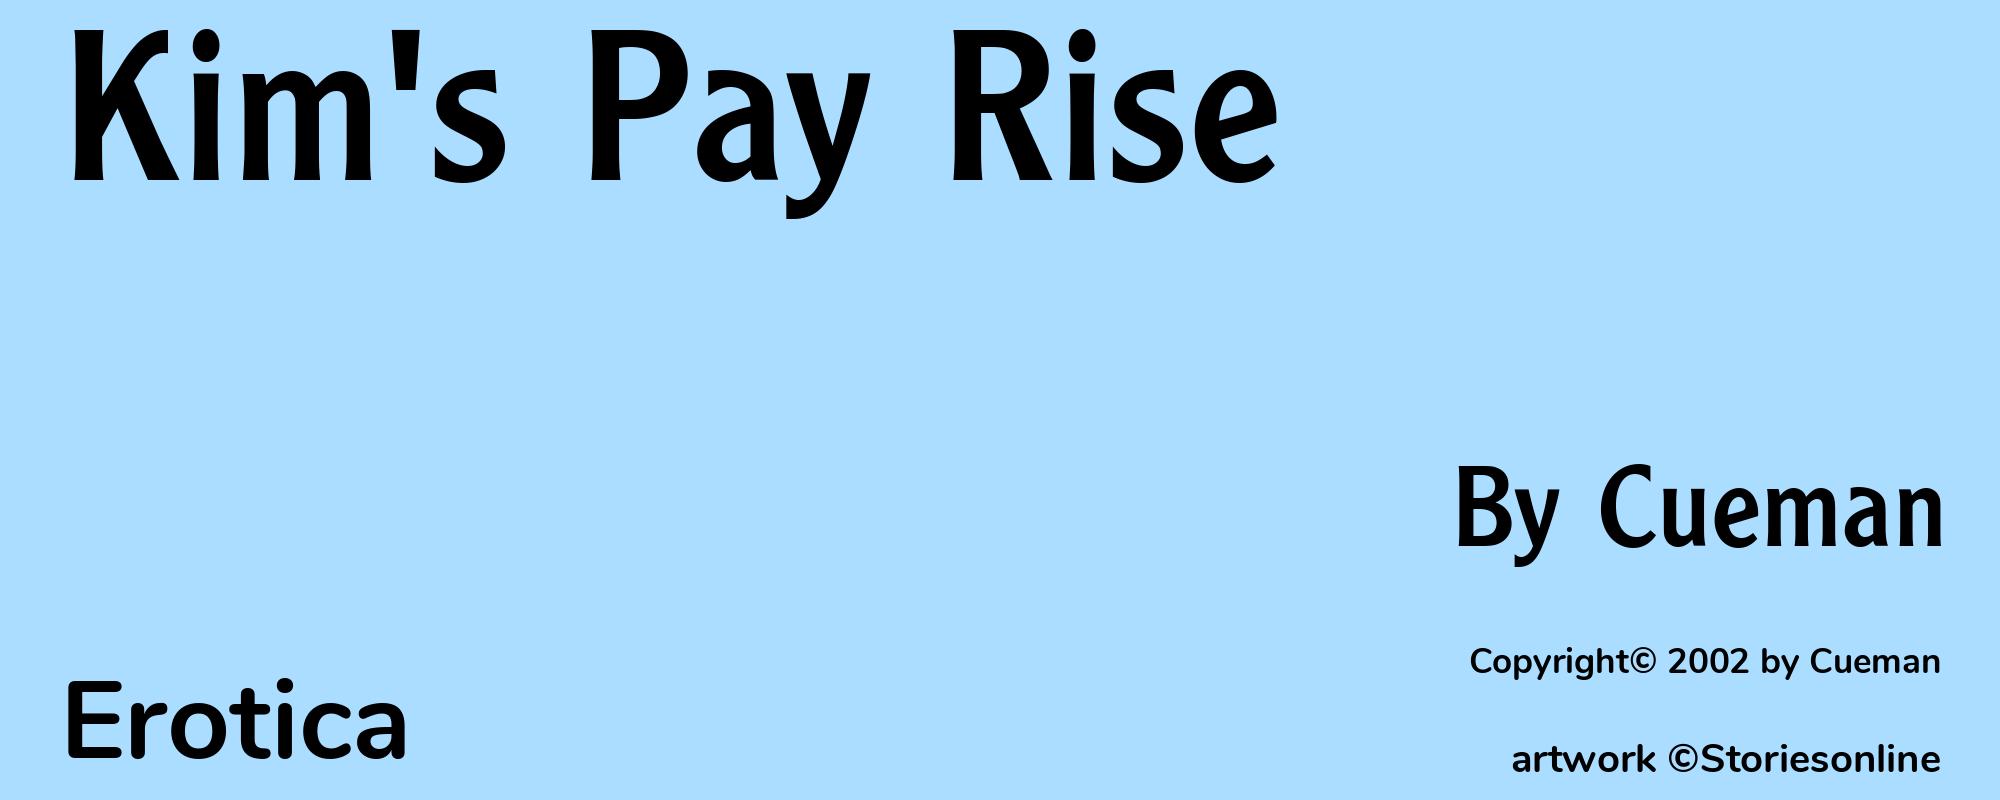 Kim's Pay Rise - Cover